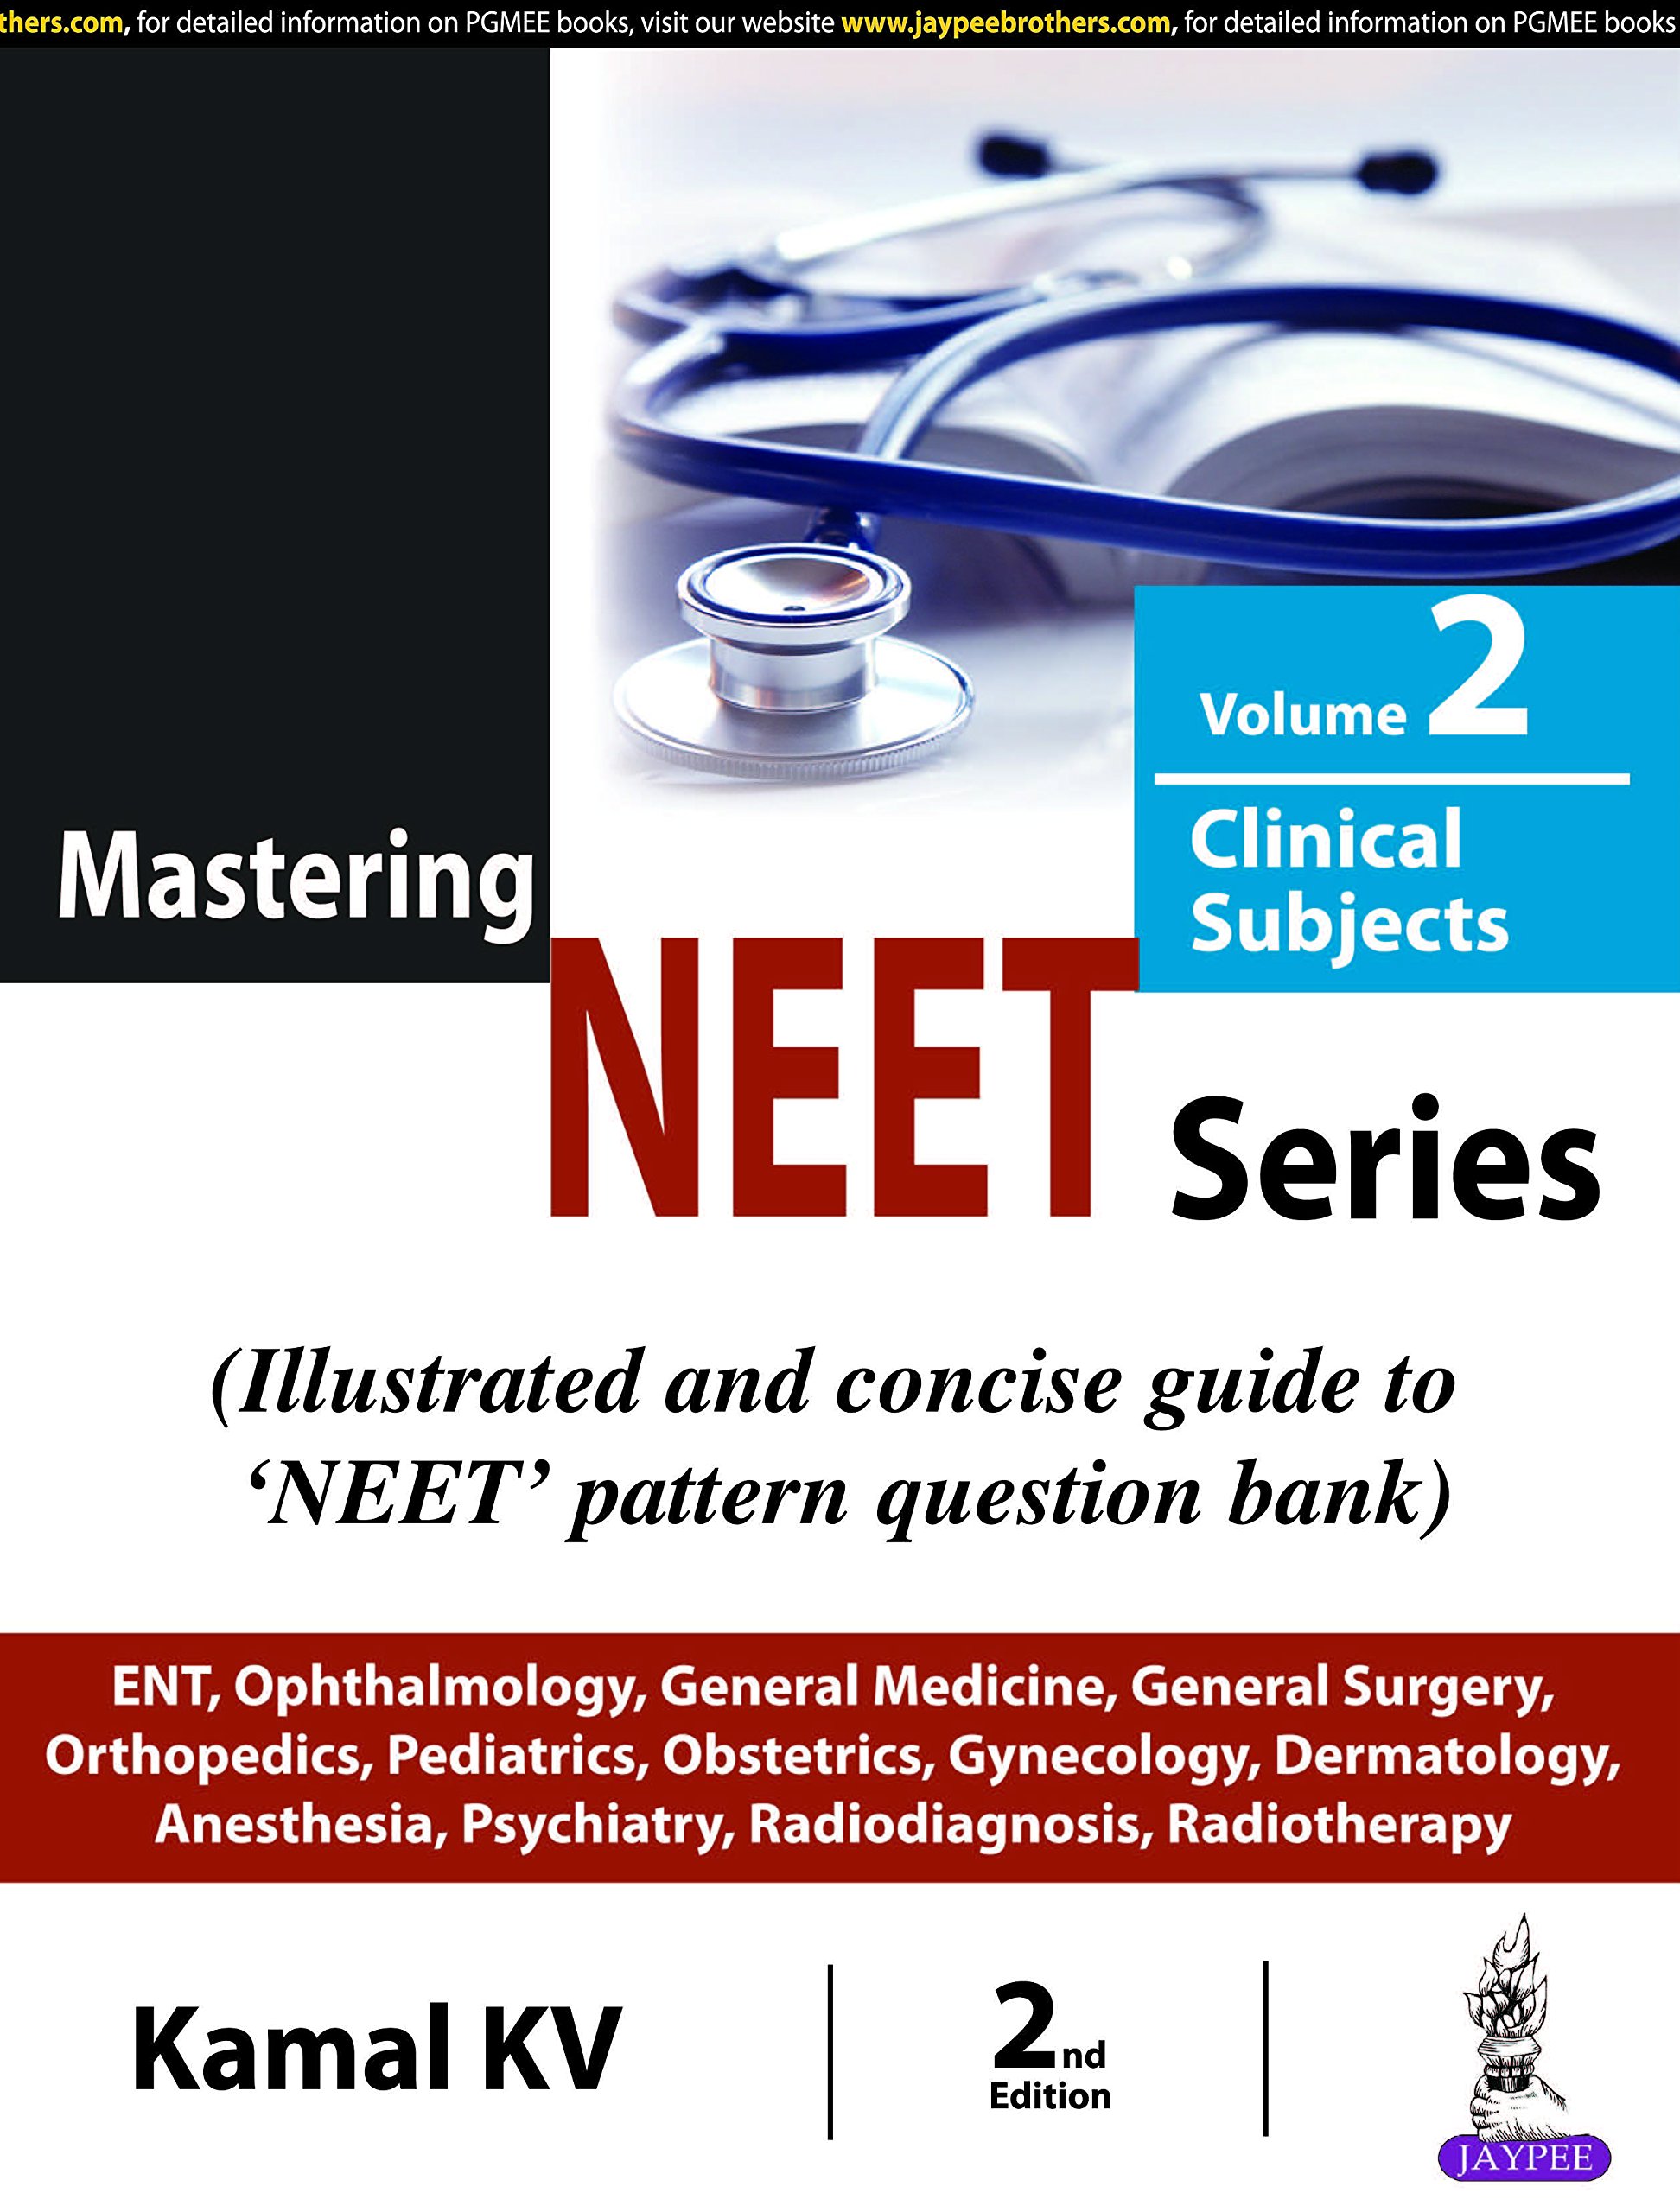 Mastering Neet Series Vol-2 Clinical Subjects